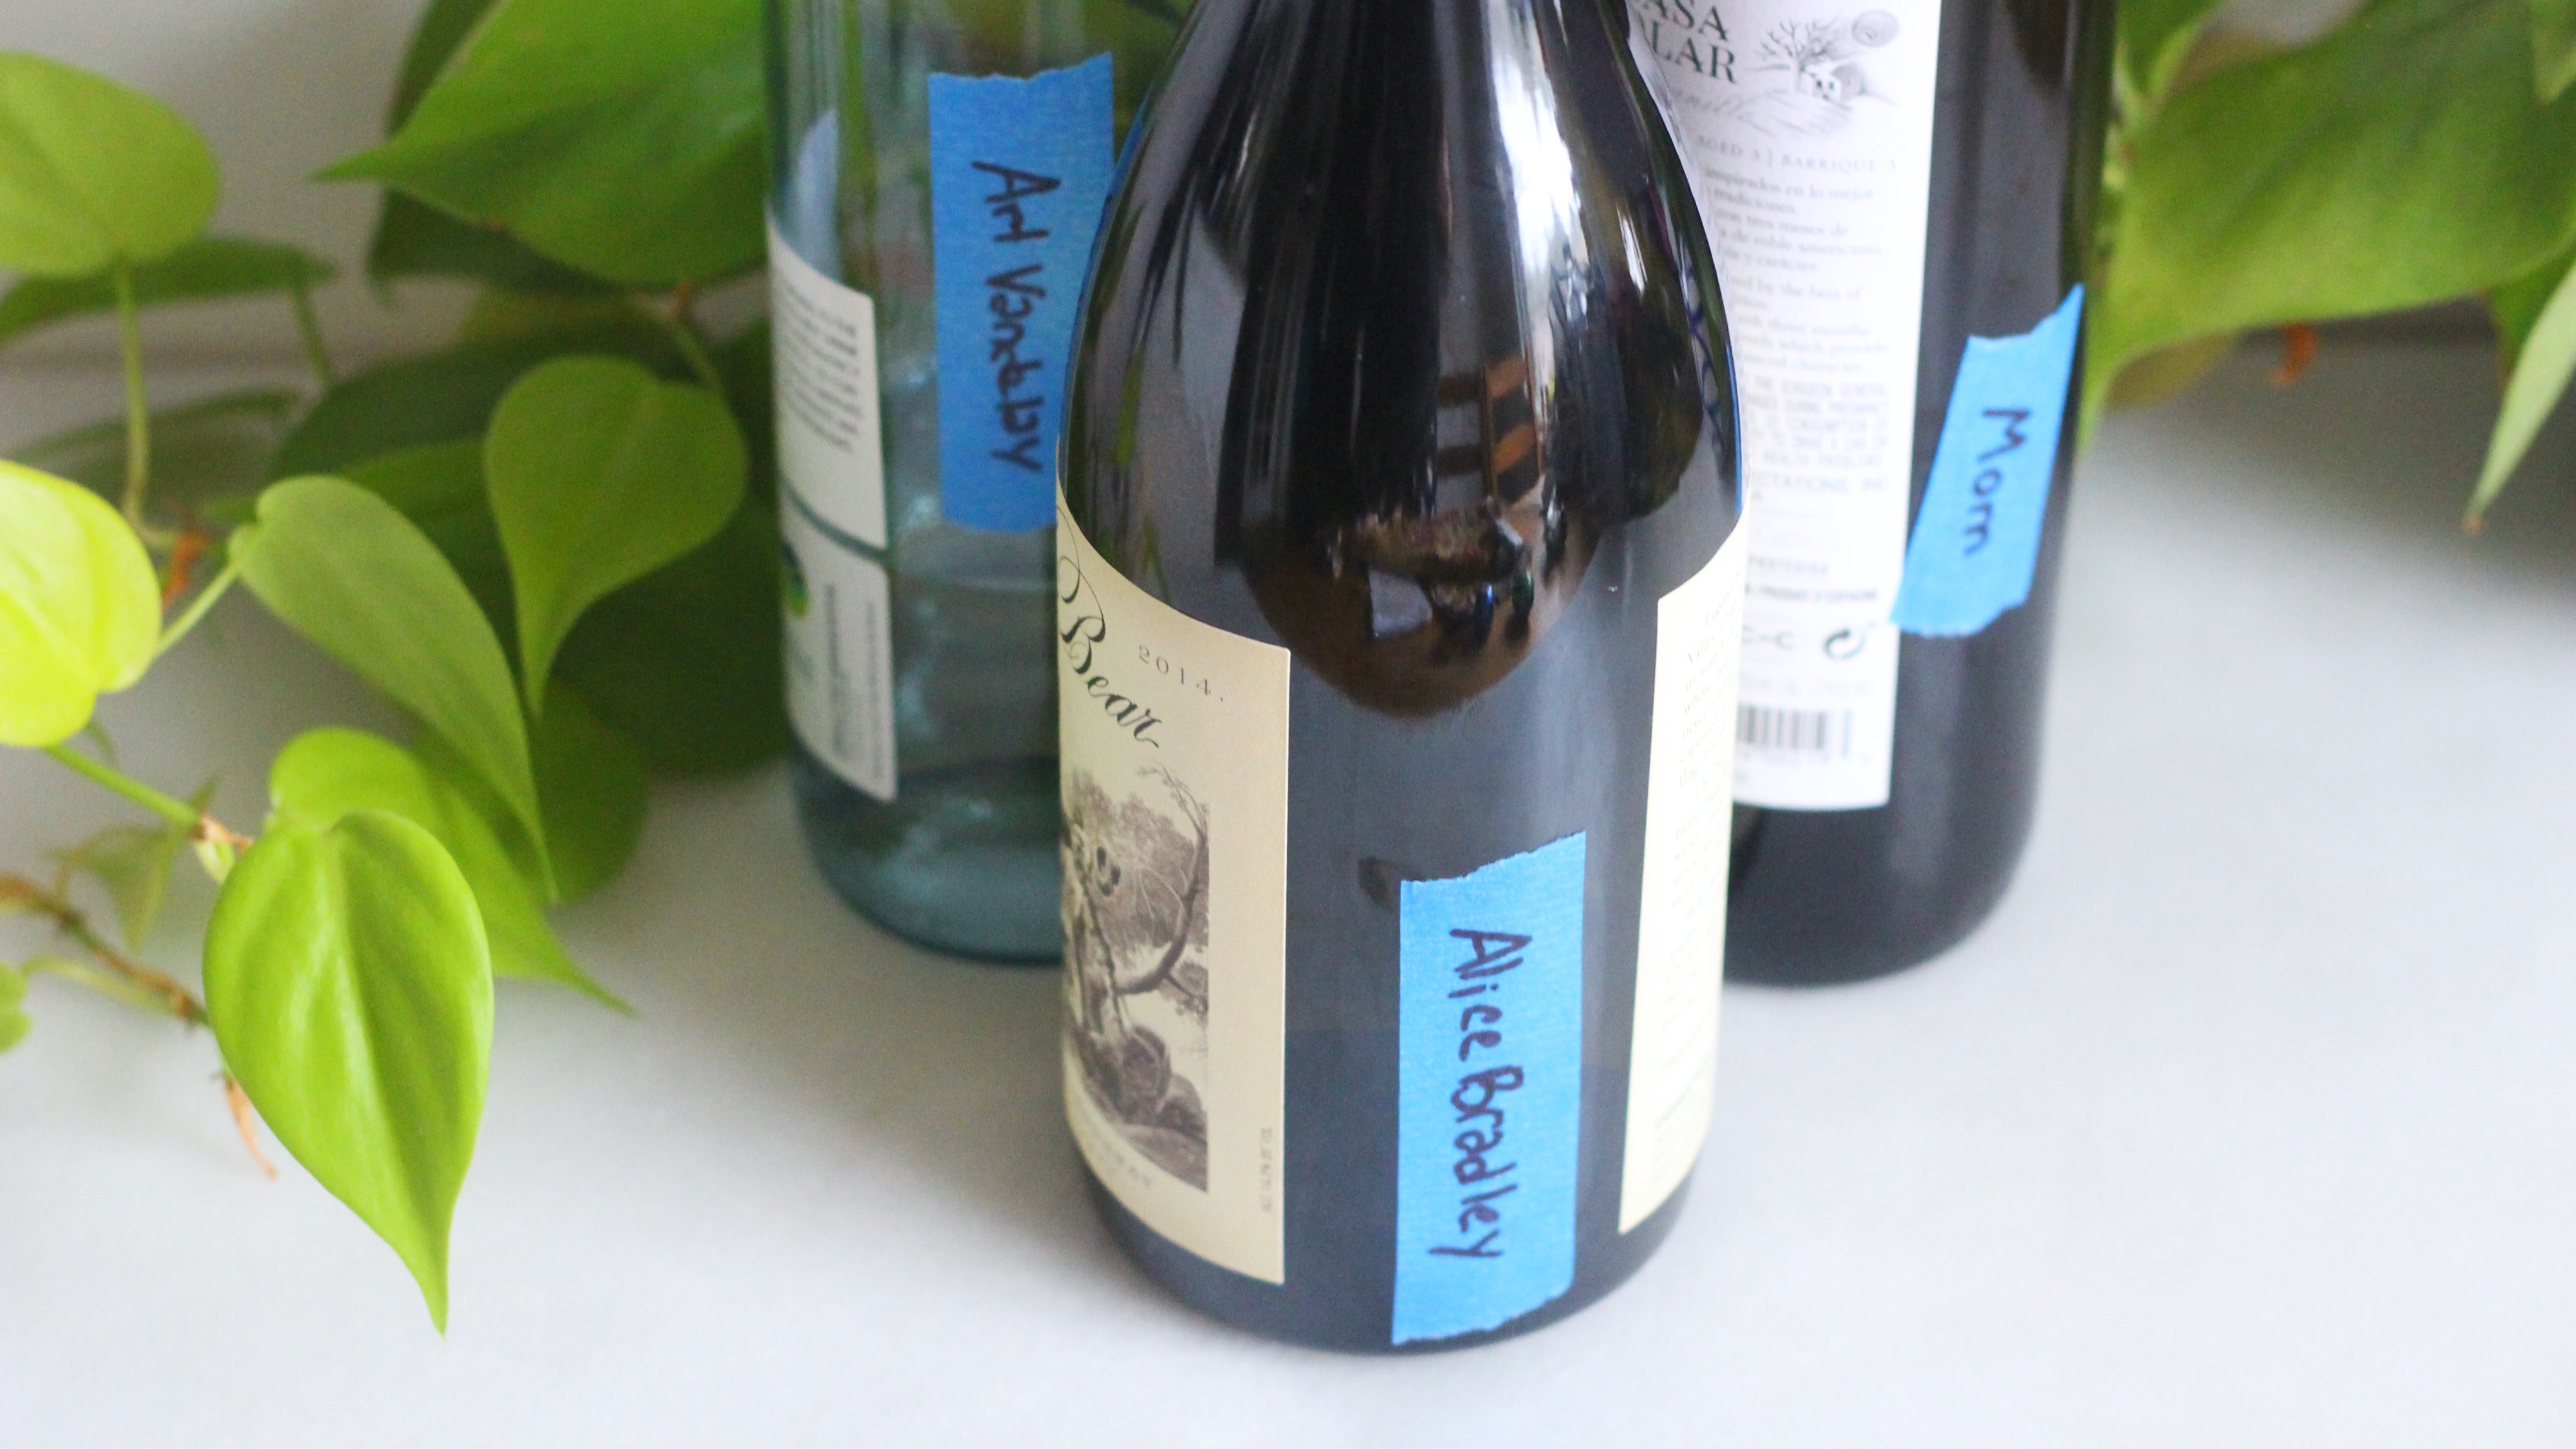 Label Your Wine Bottles So You Know Who Gave Them To You